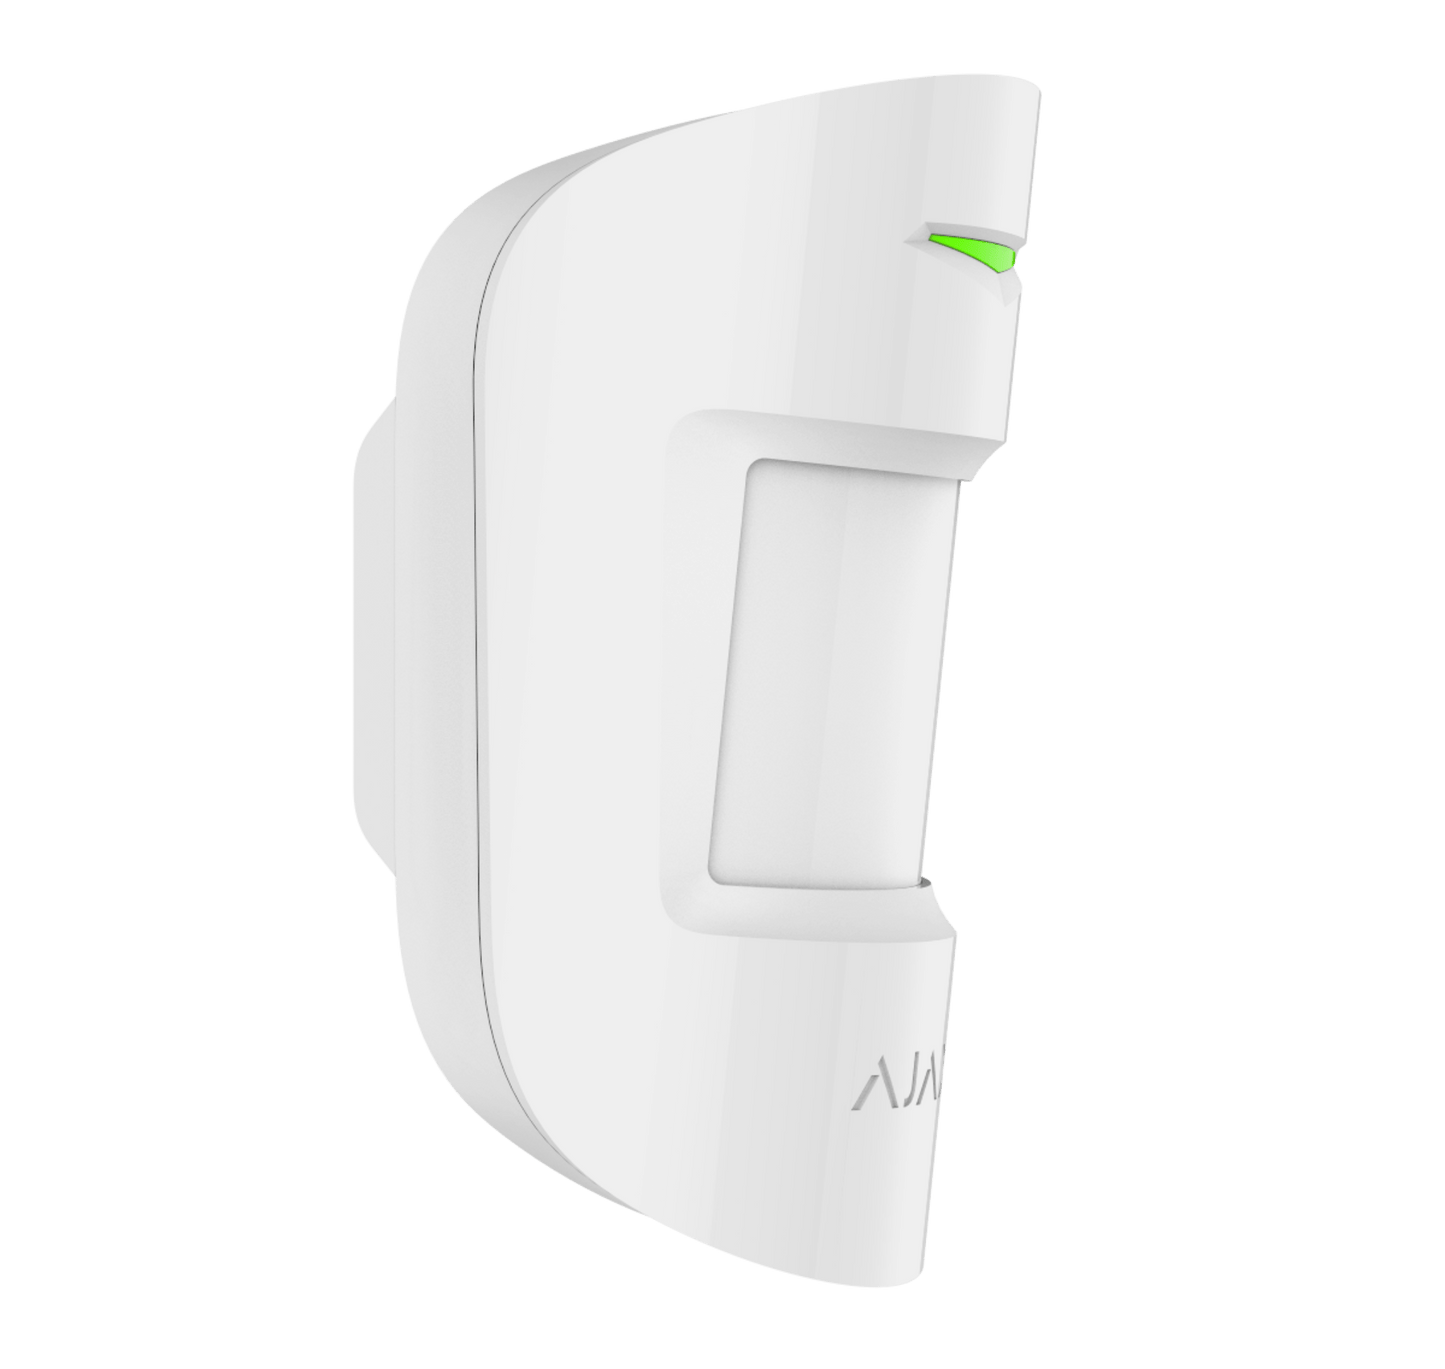 White Ajax MotionProtect wireless motion sensor from Ajax Security Systems, 110 × 65 × 50 mm in size, 86grams in weight . for smart home and business security, Side view of device